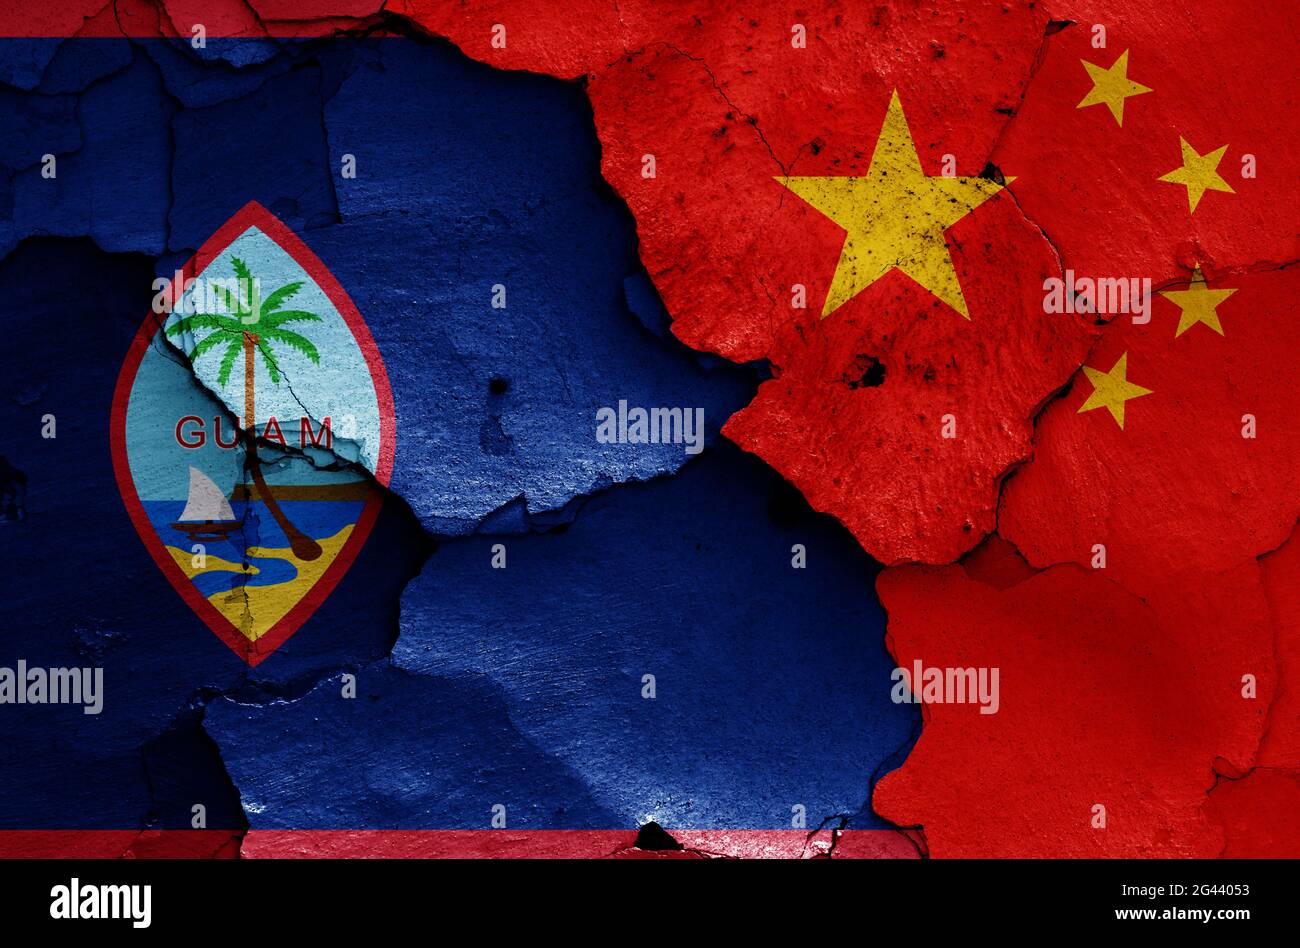 Flags of Guam and China painted on cracked wall Stock Photo